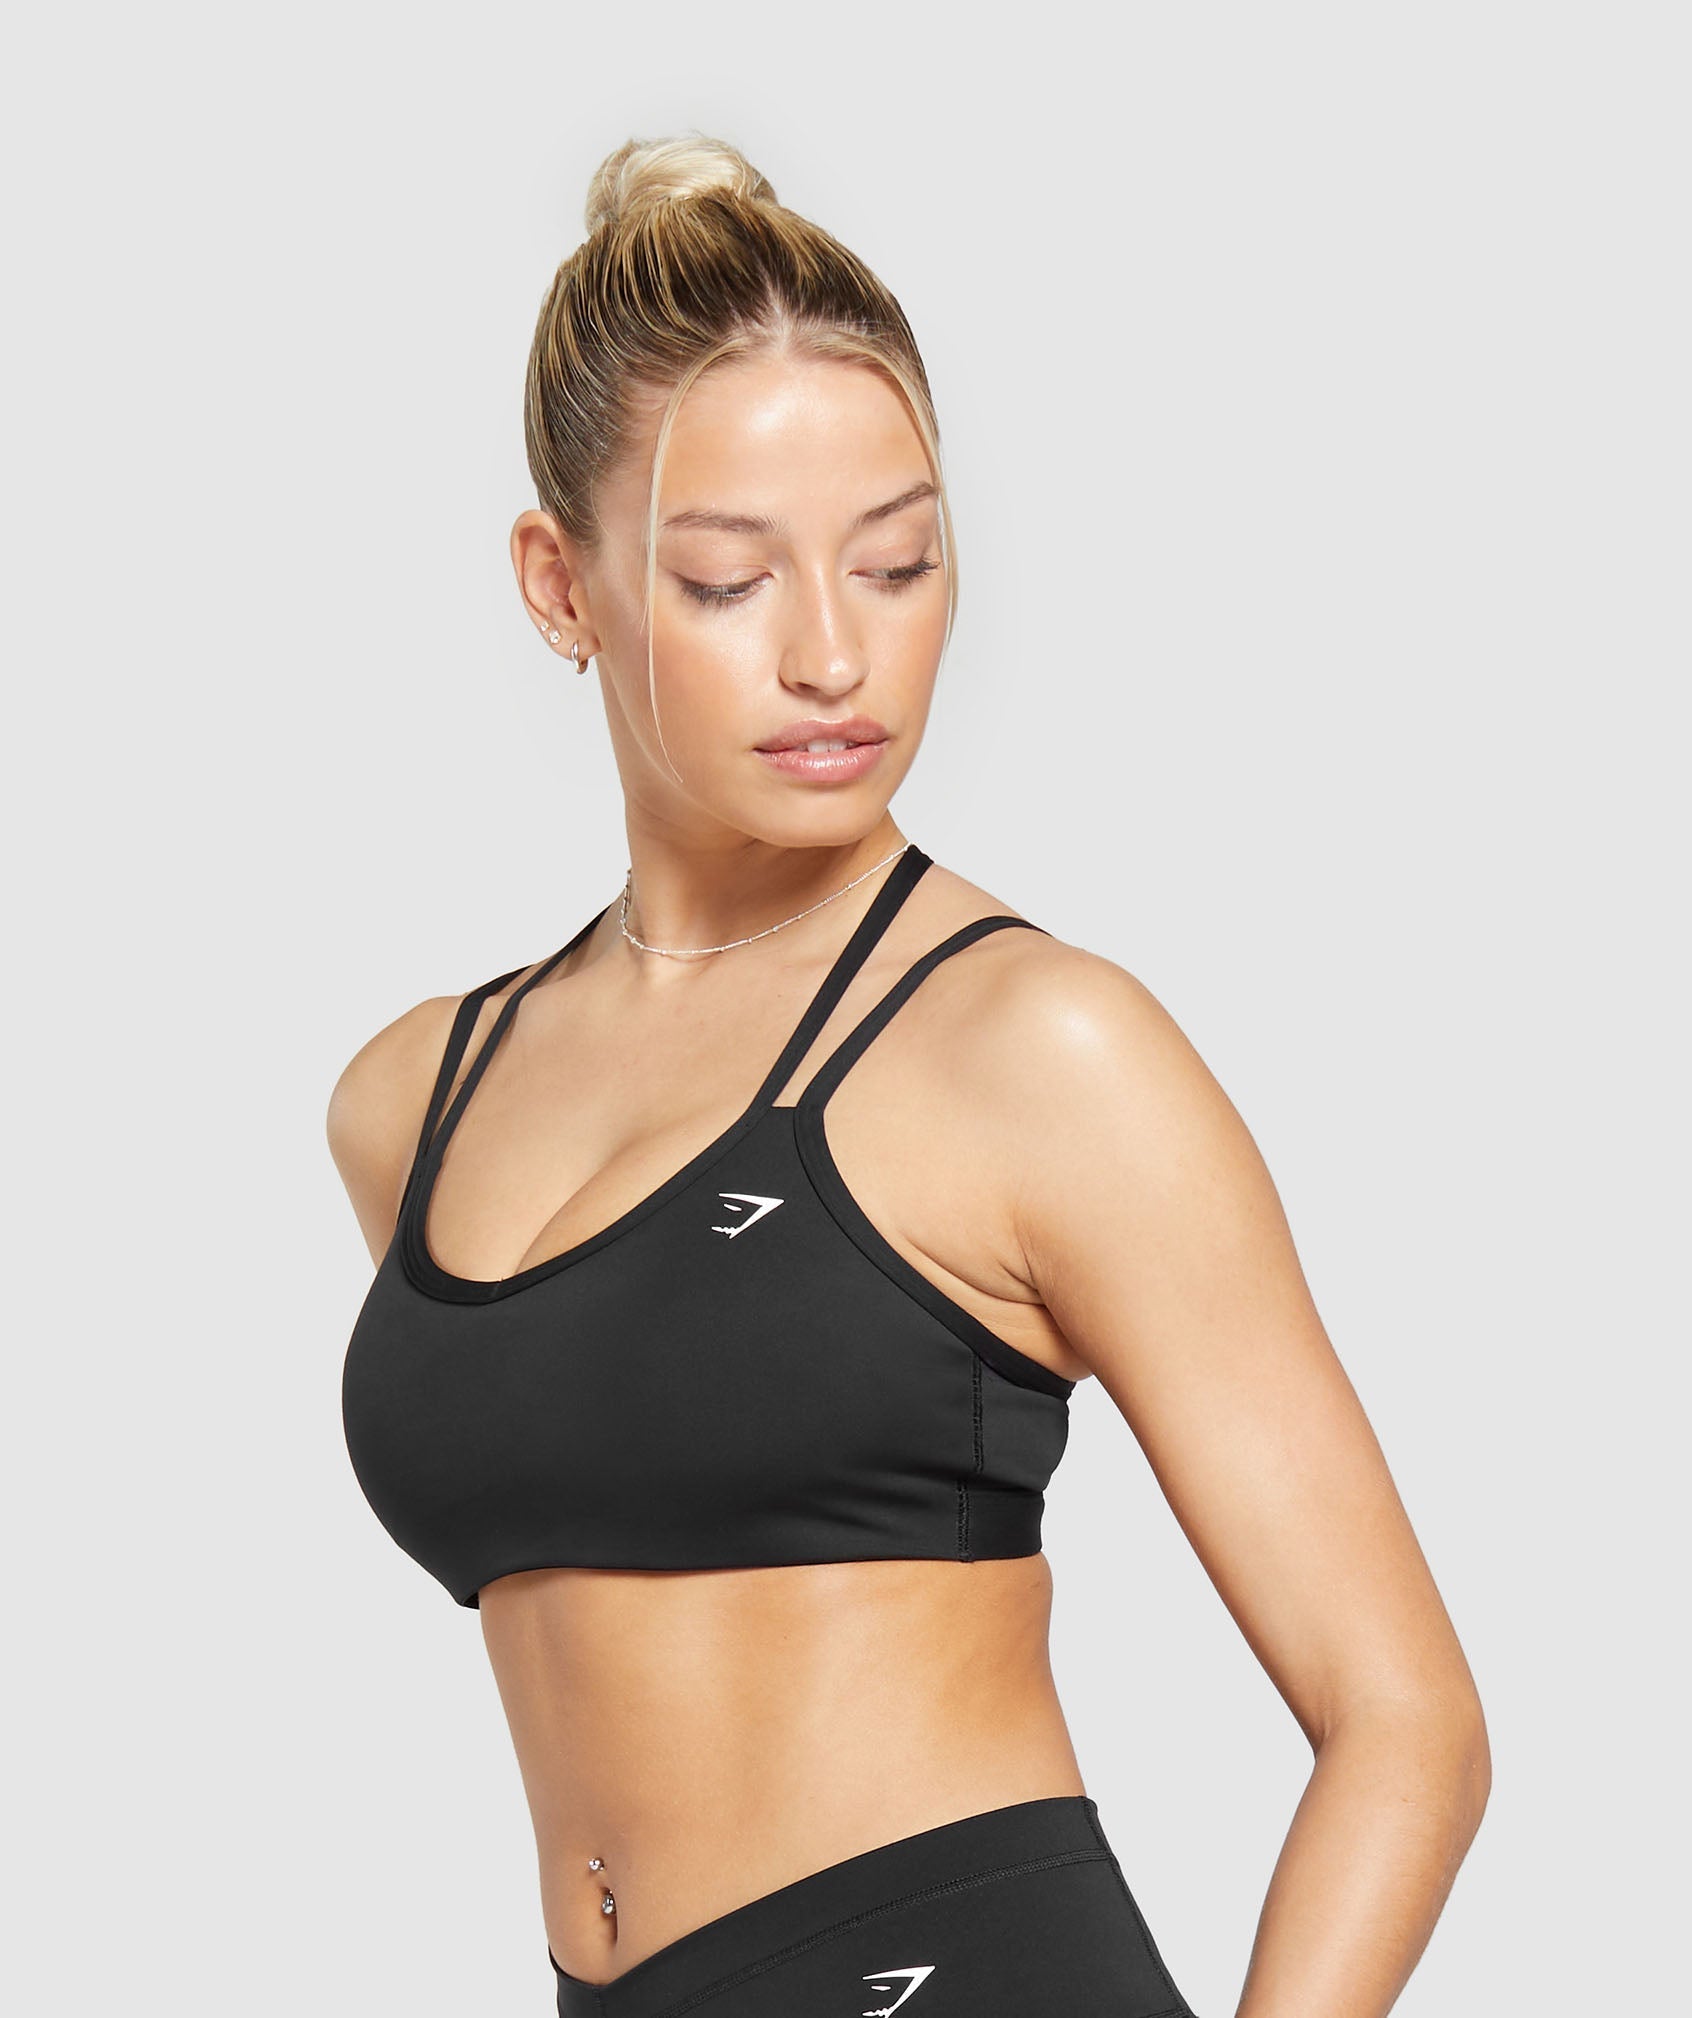 GYMSHARK RUCHED SPORTS BRA BLACK S nwt in packaging